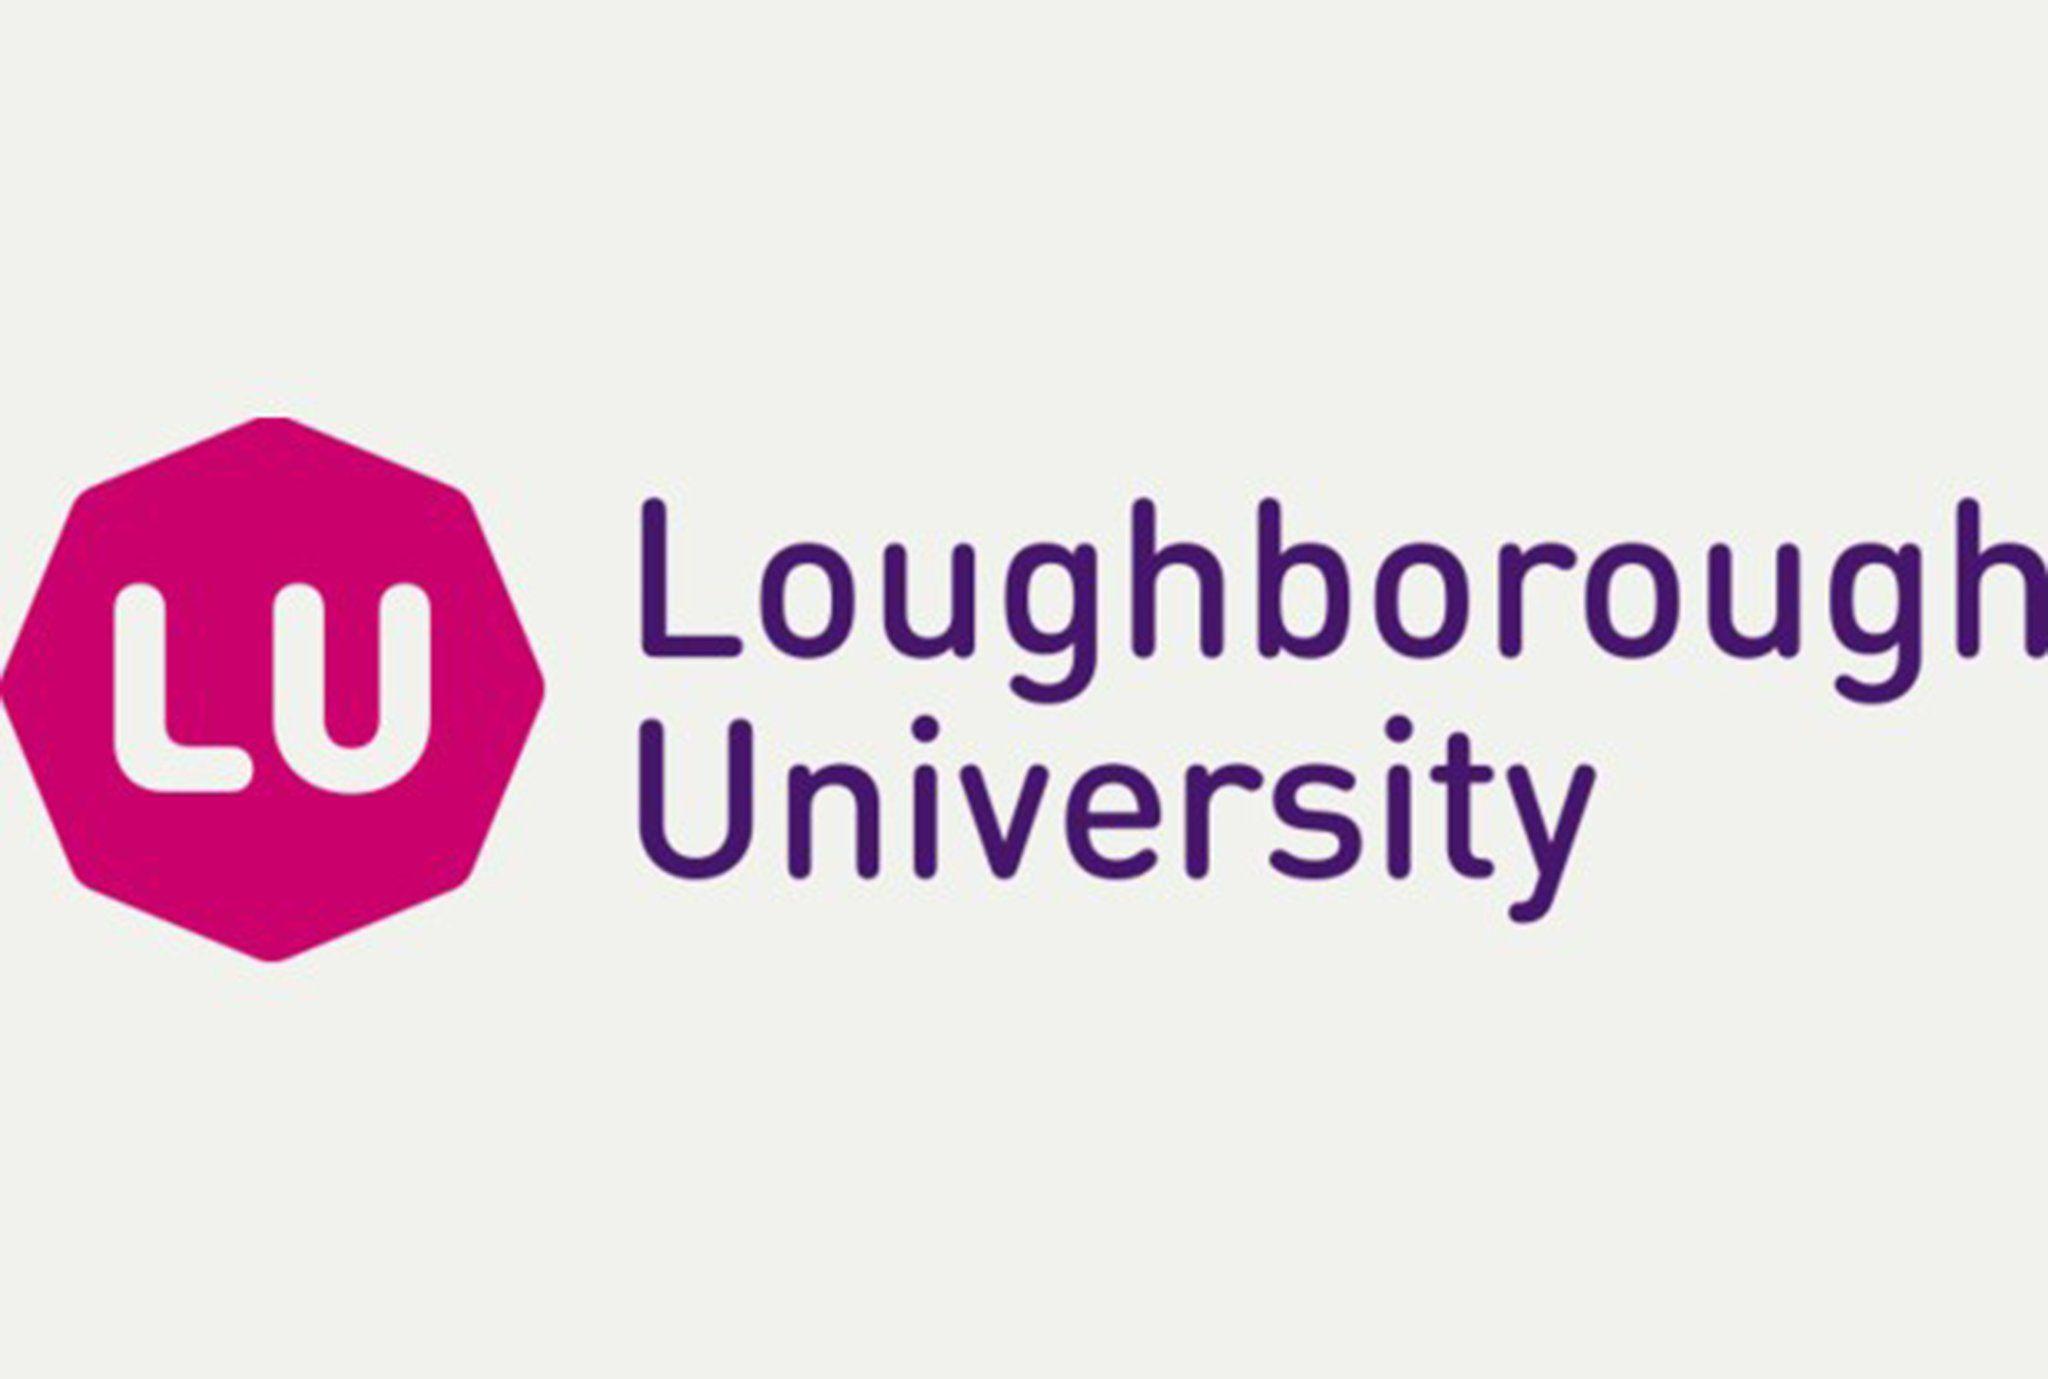 Loughborough Logo - Loughborough becomes the latest university to be hit